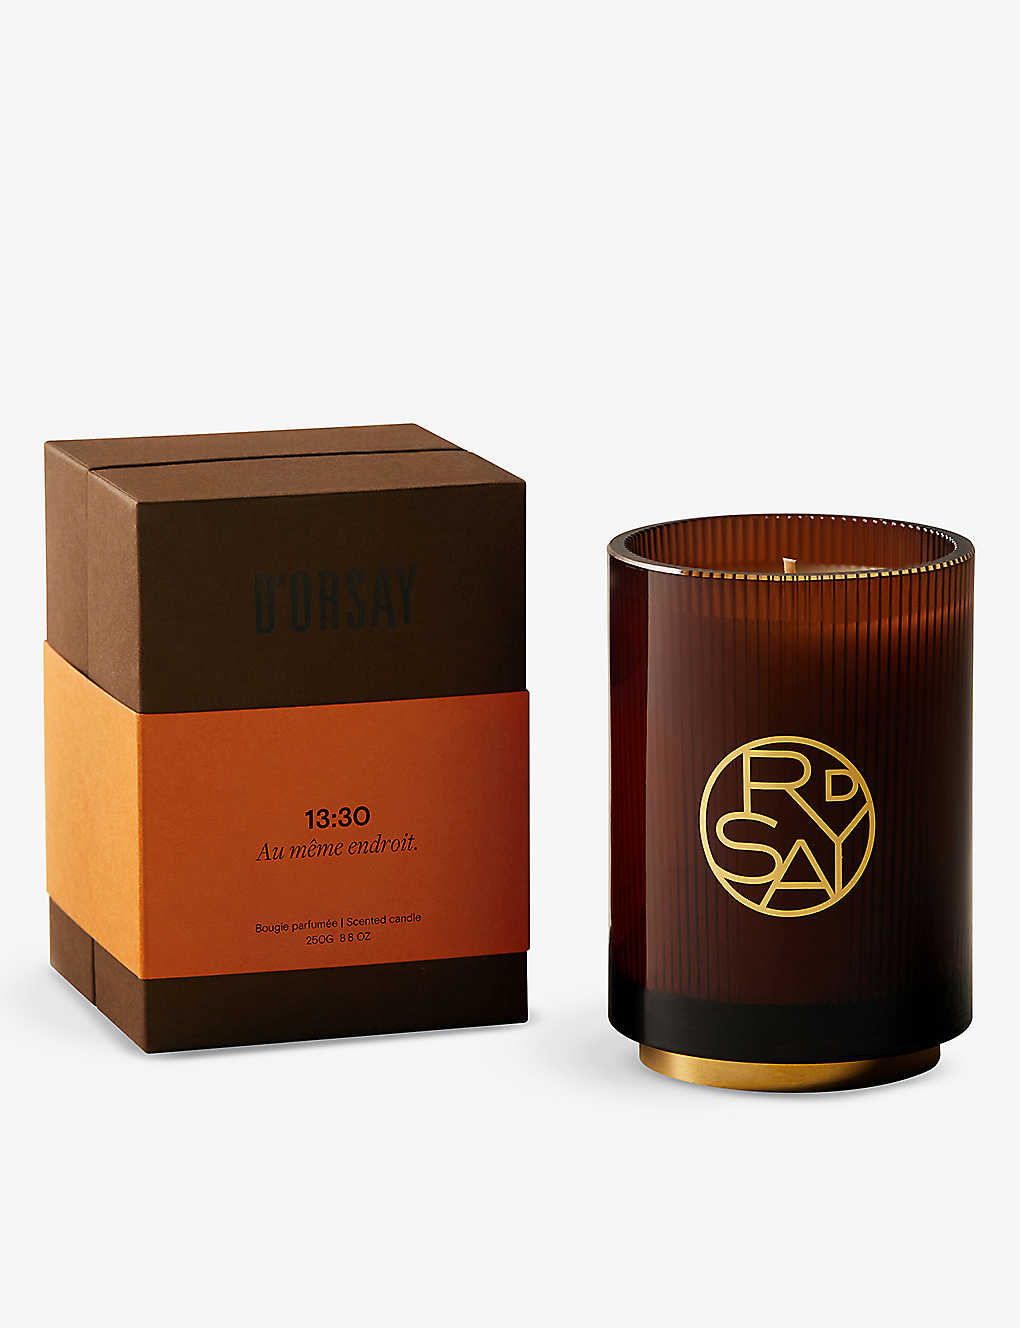 D'orsay 13:30 Scented Candle 250g